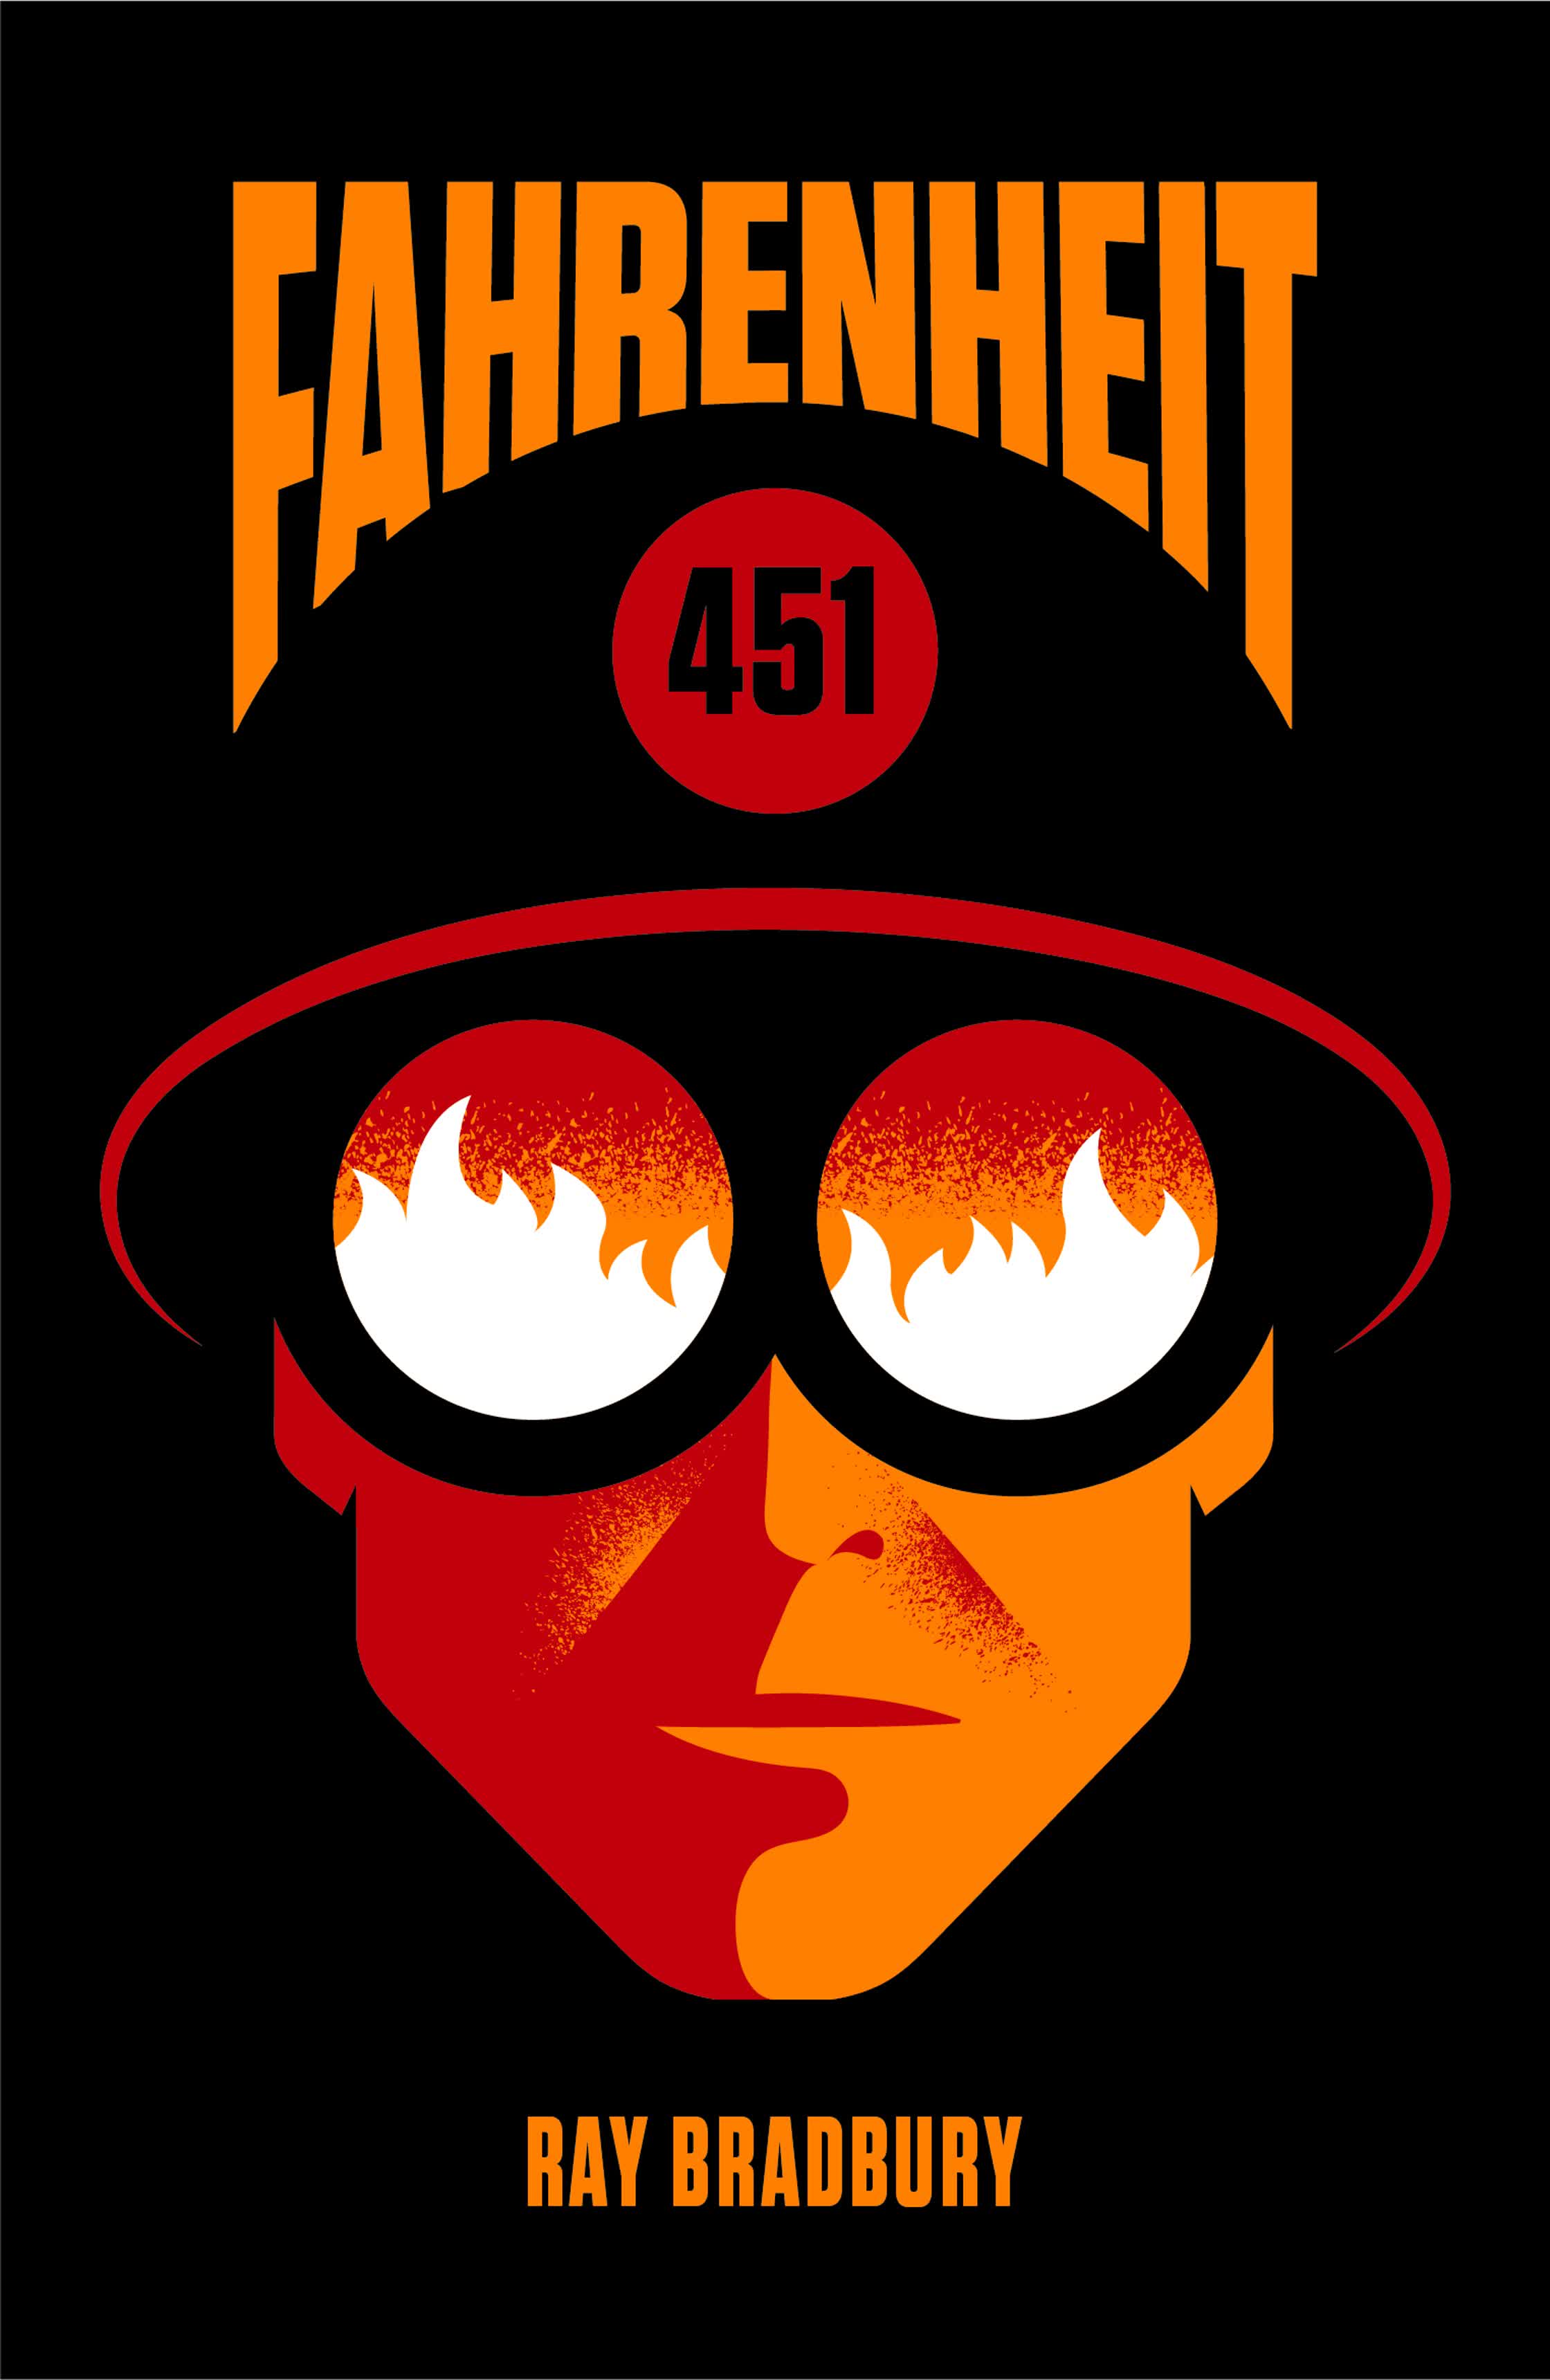 Fahrenheit 451 / Kit Russell - Projects - Debut Art